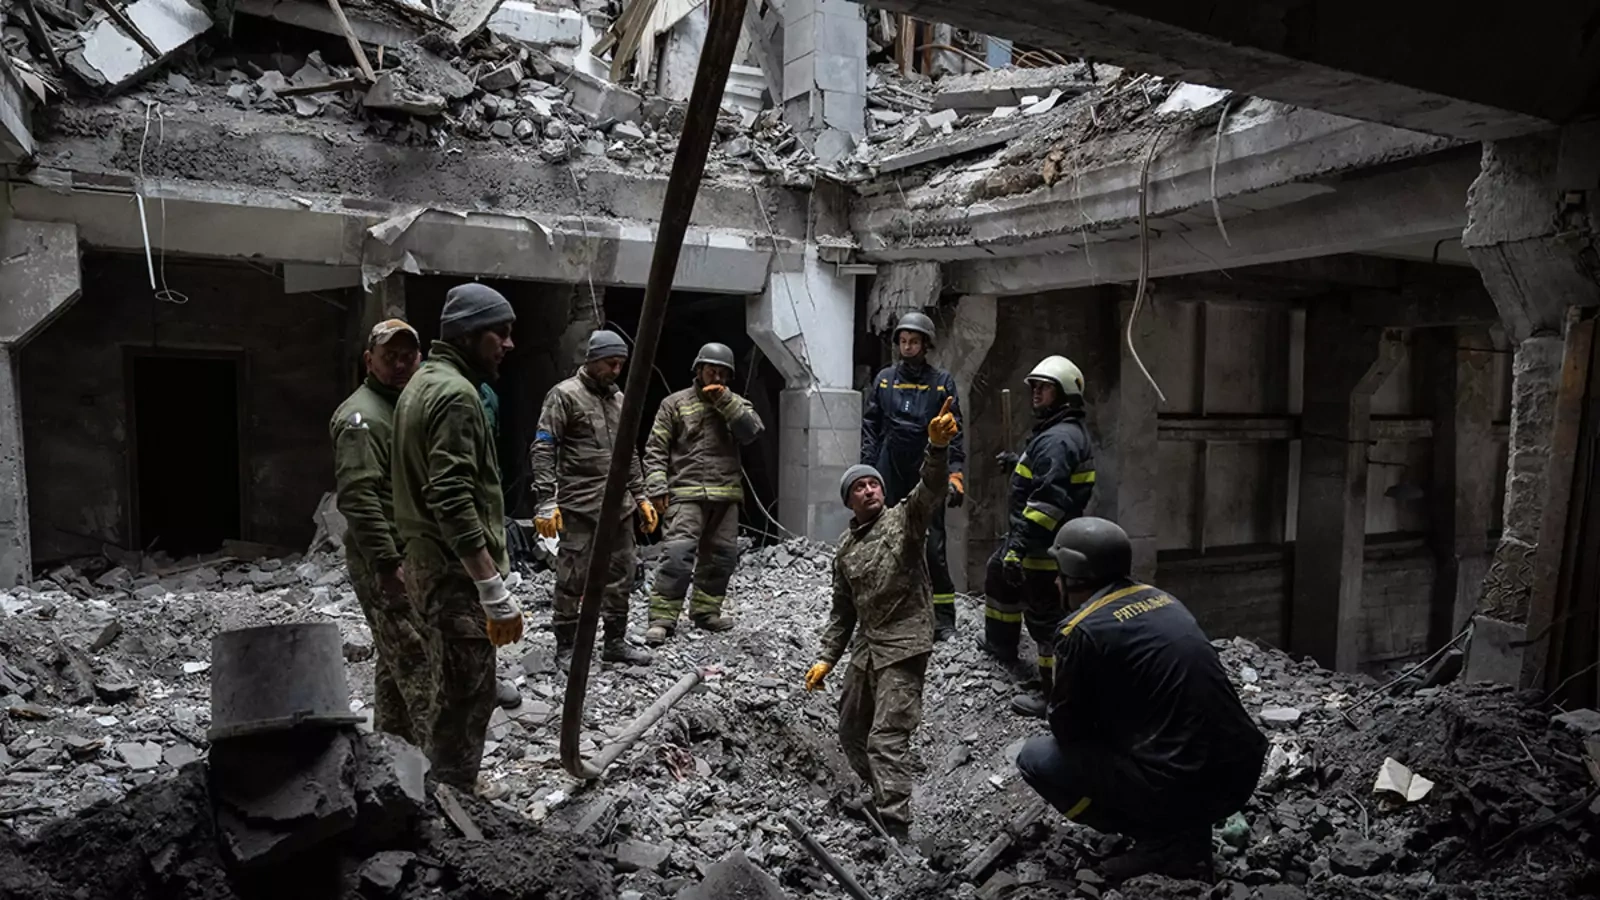 A soldier searches for bodies in a building struck by a Russian missile on October 13, 2022 in Kupiansk, Kharkiv oblast, Ukraine.